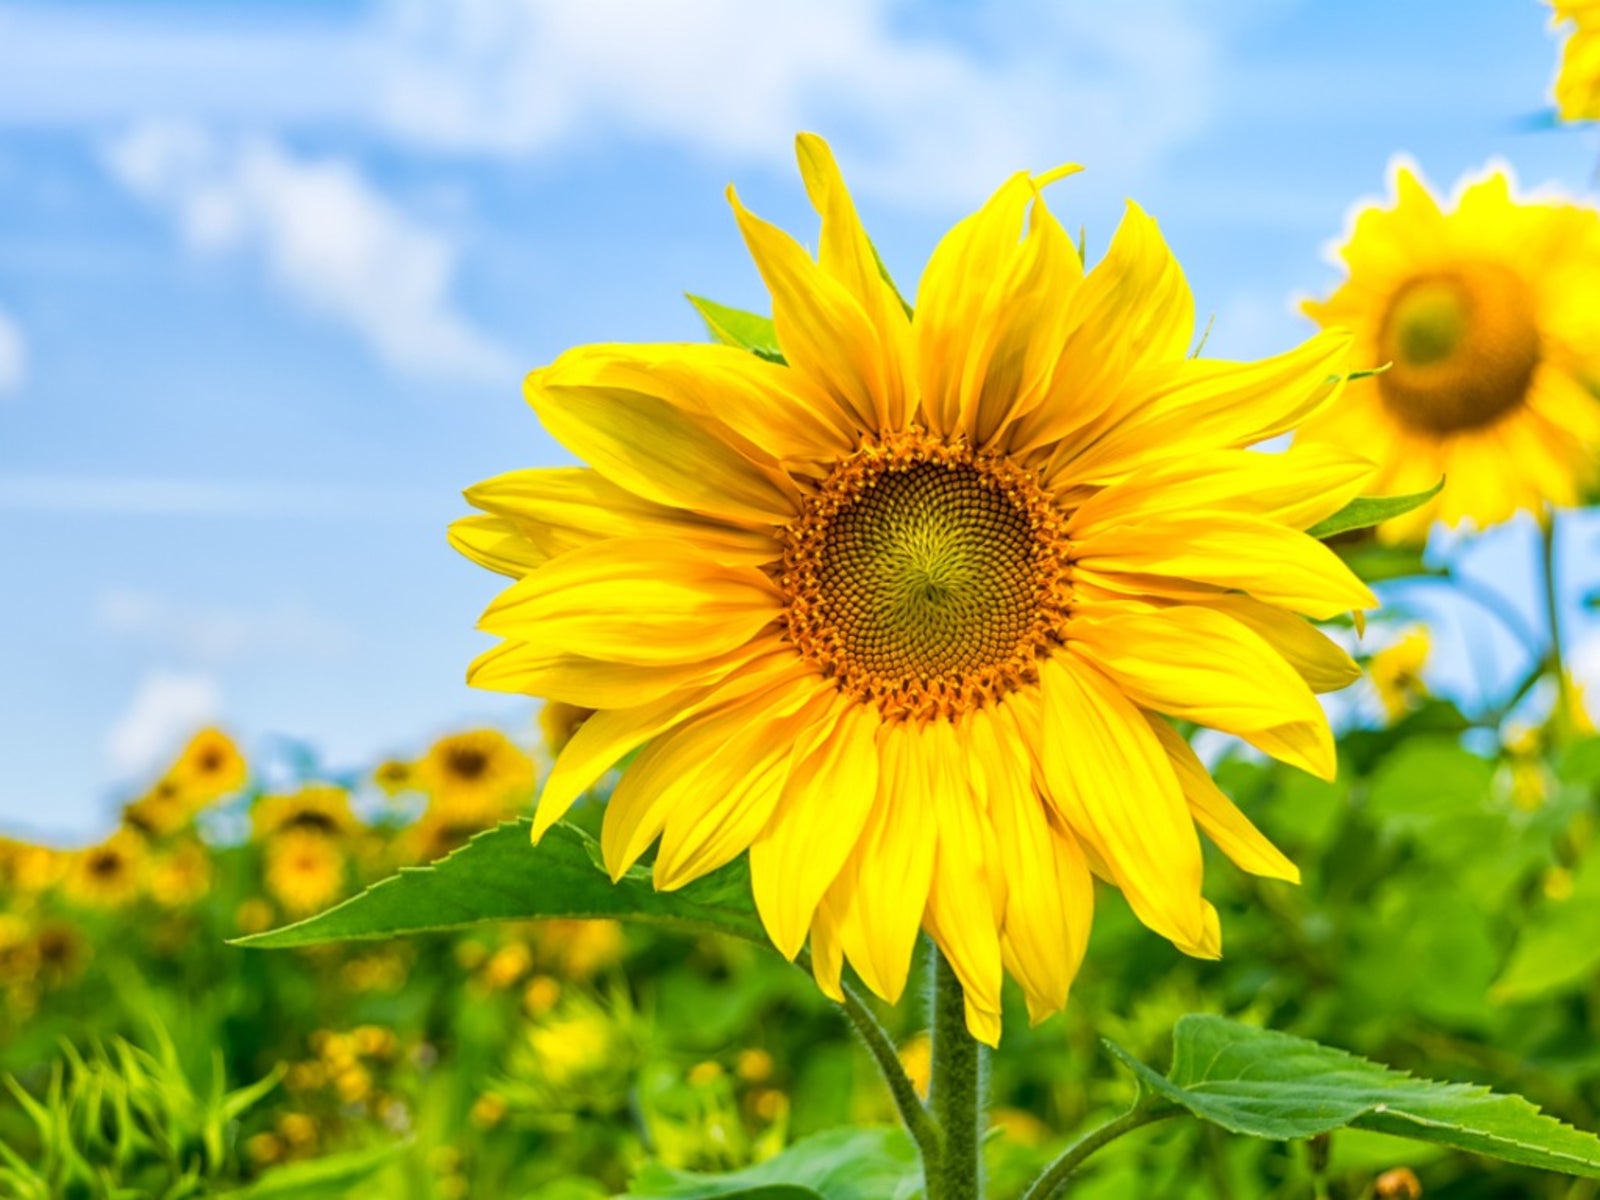 Growing Sunflowers: How To Add Sunflowers To The Garden